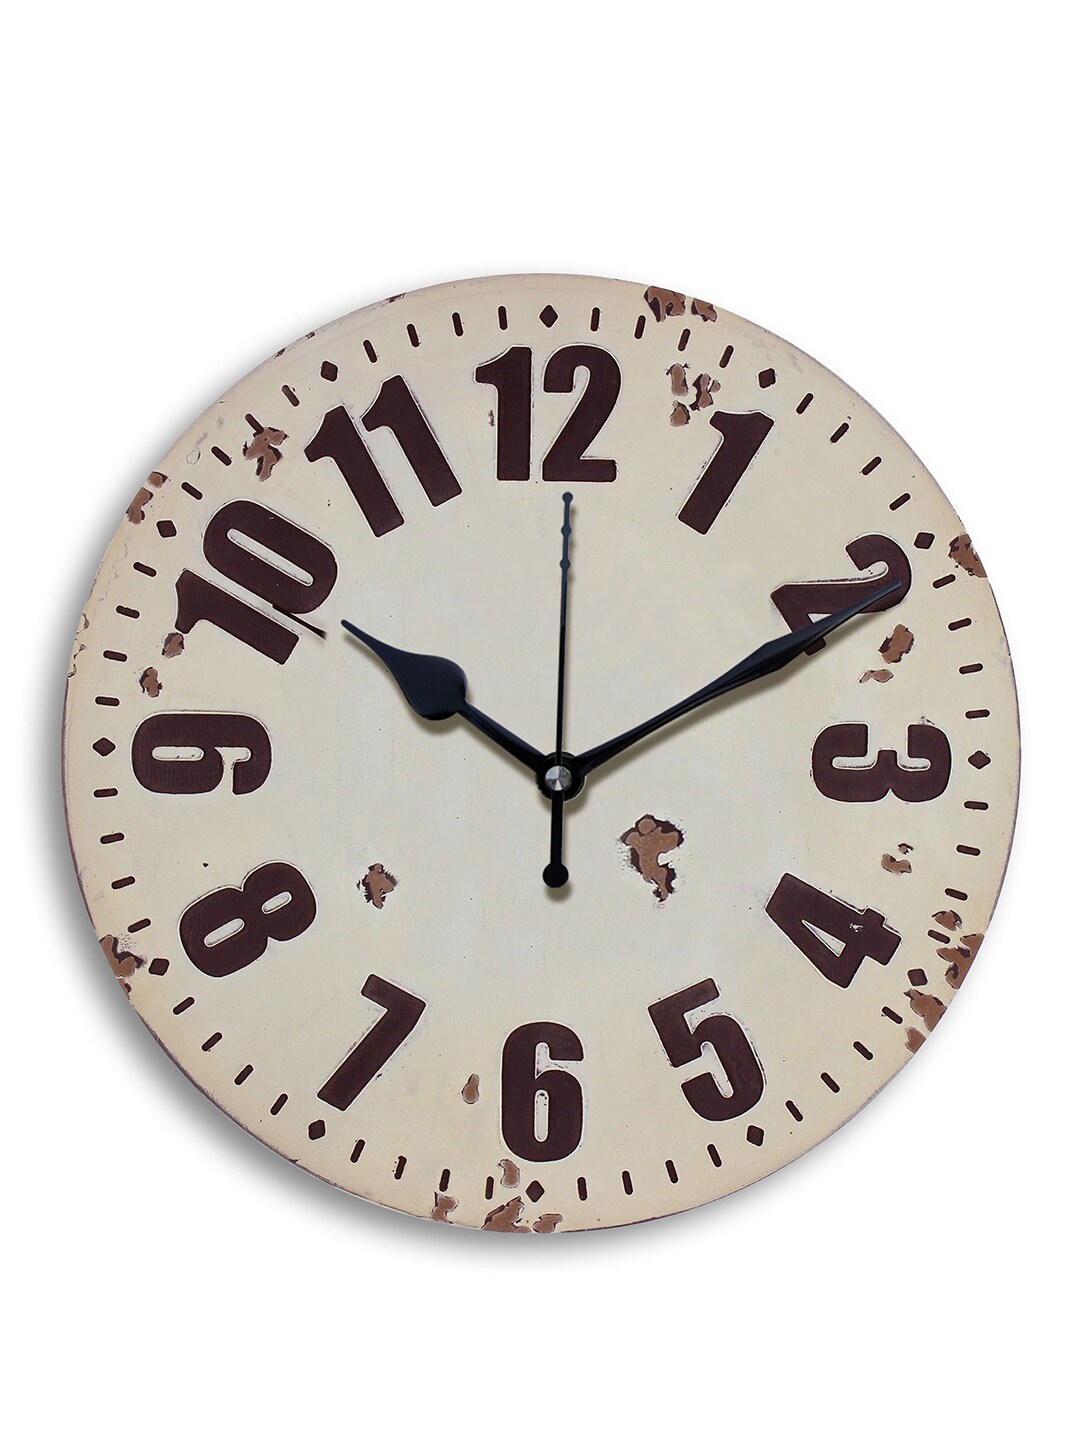 RANDOM Beige Dial Perfect 29.21 cm Analogue Wall Clock Price in India